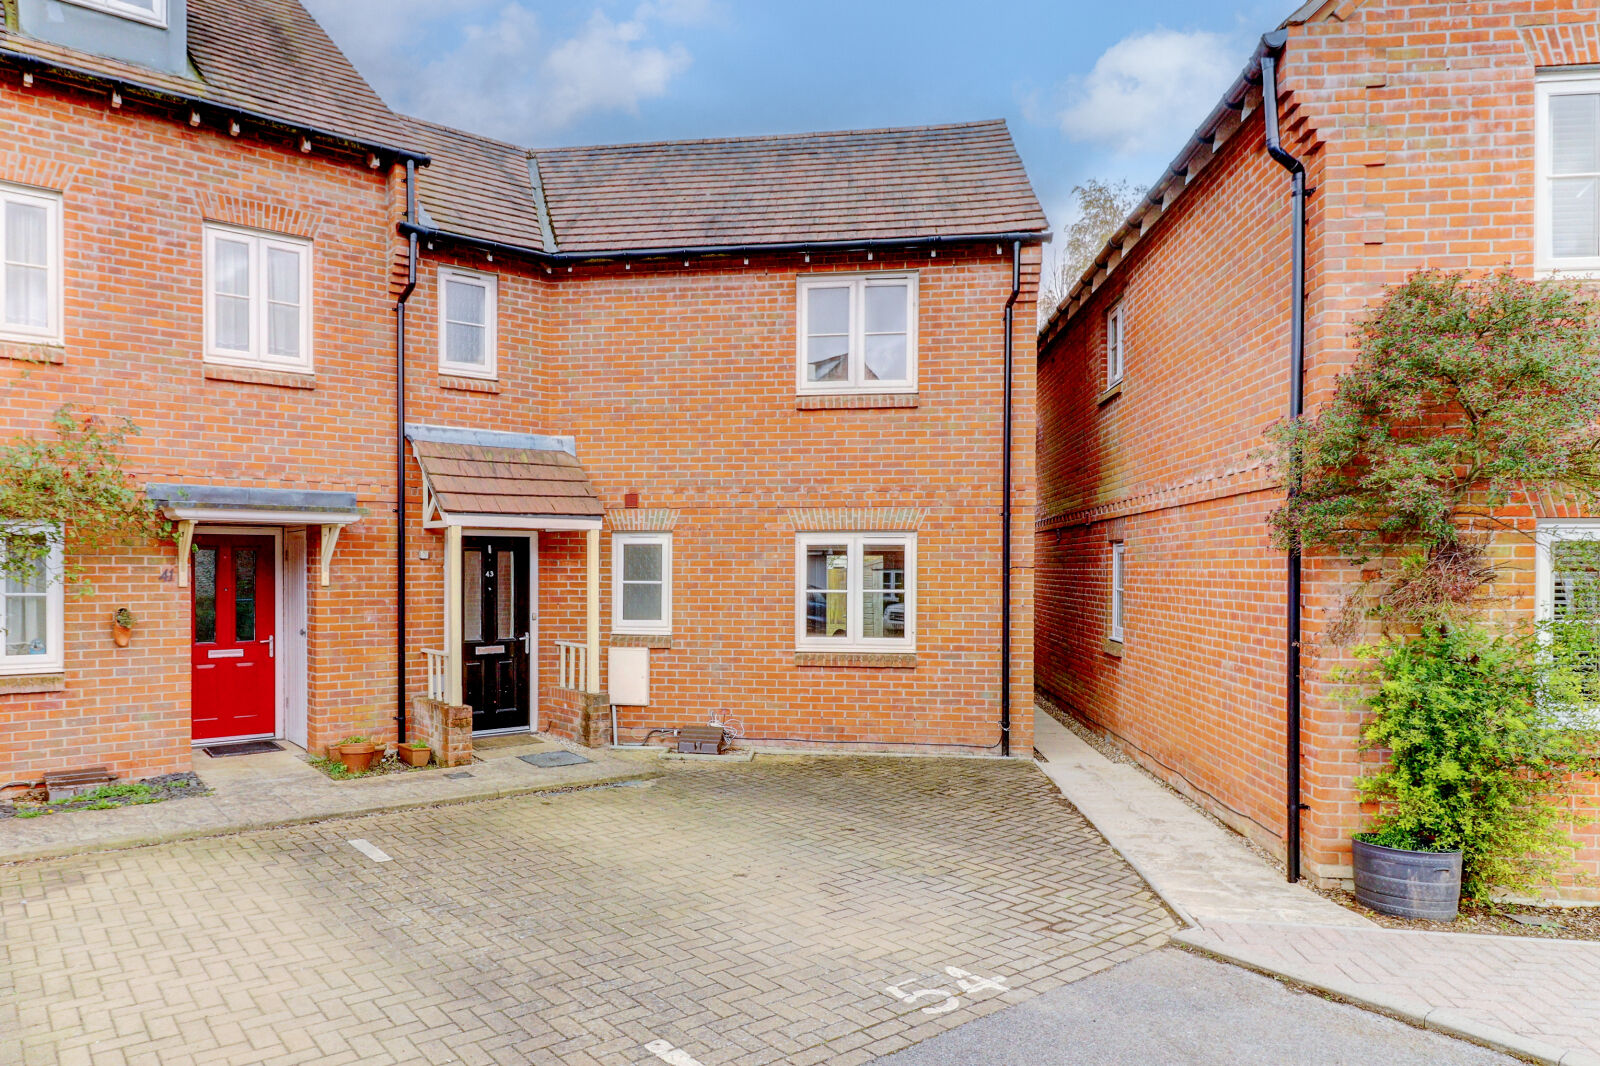 3 bedroom end terraced house for sale Wellesbourne Crescent, High Wycombe, HP13, main image